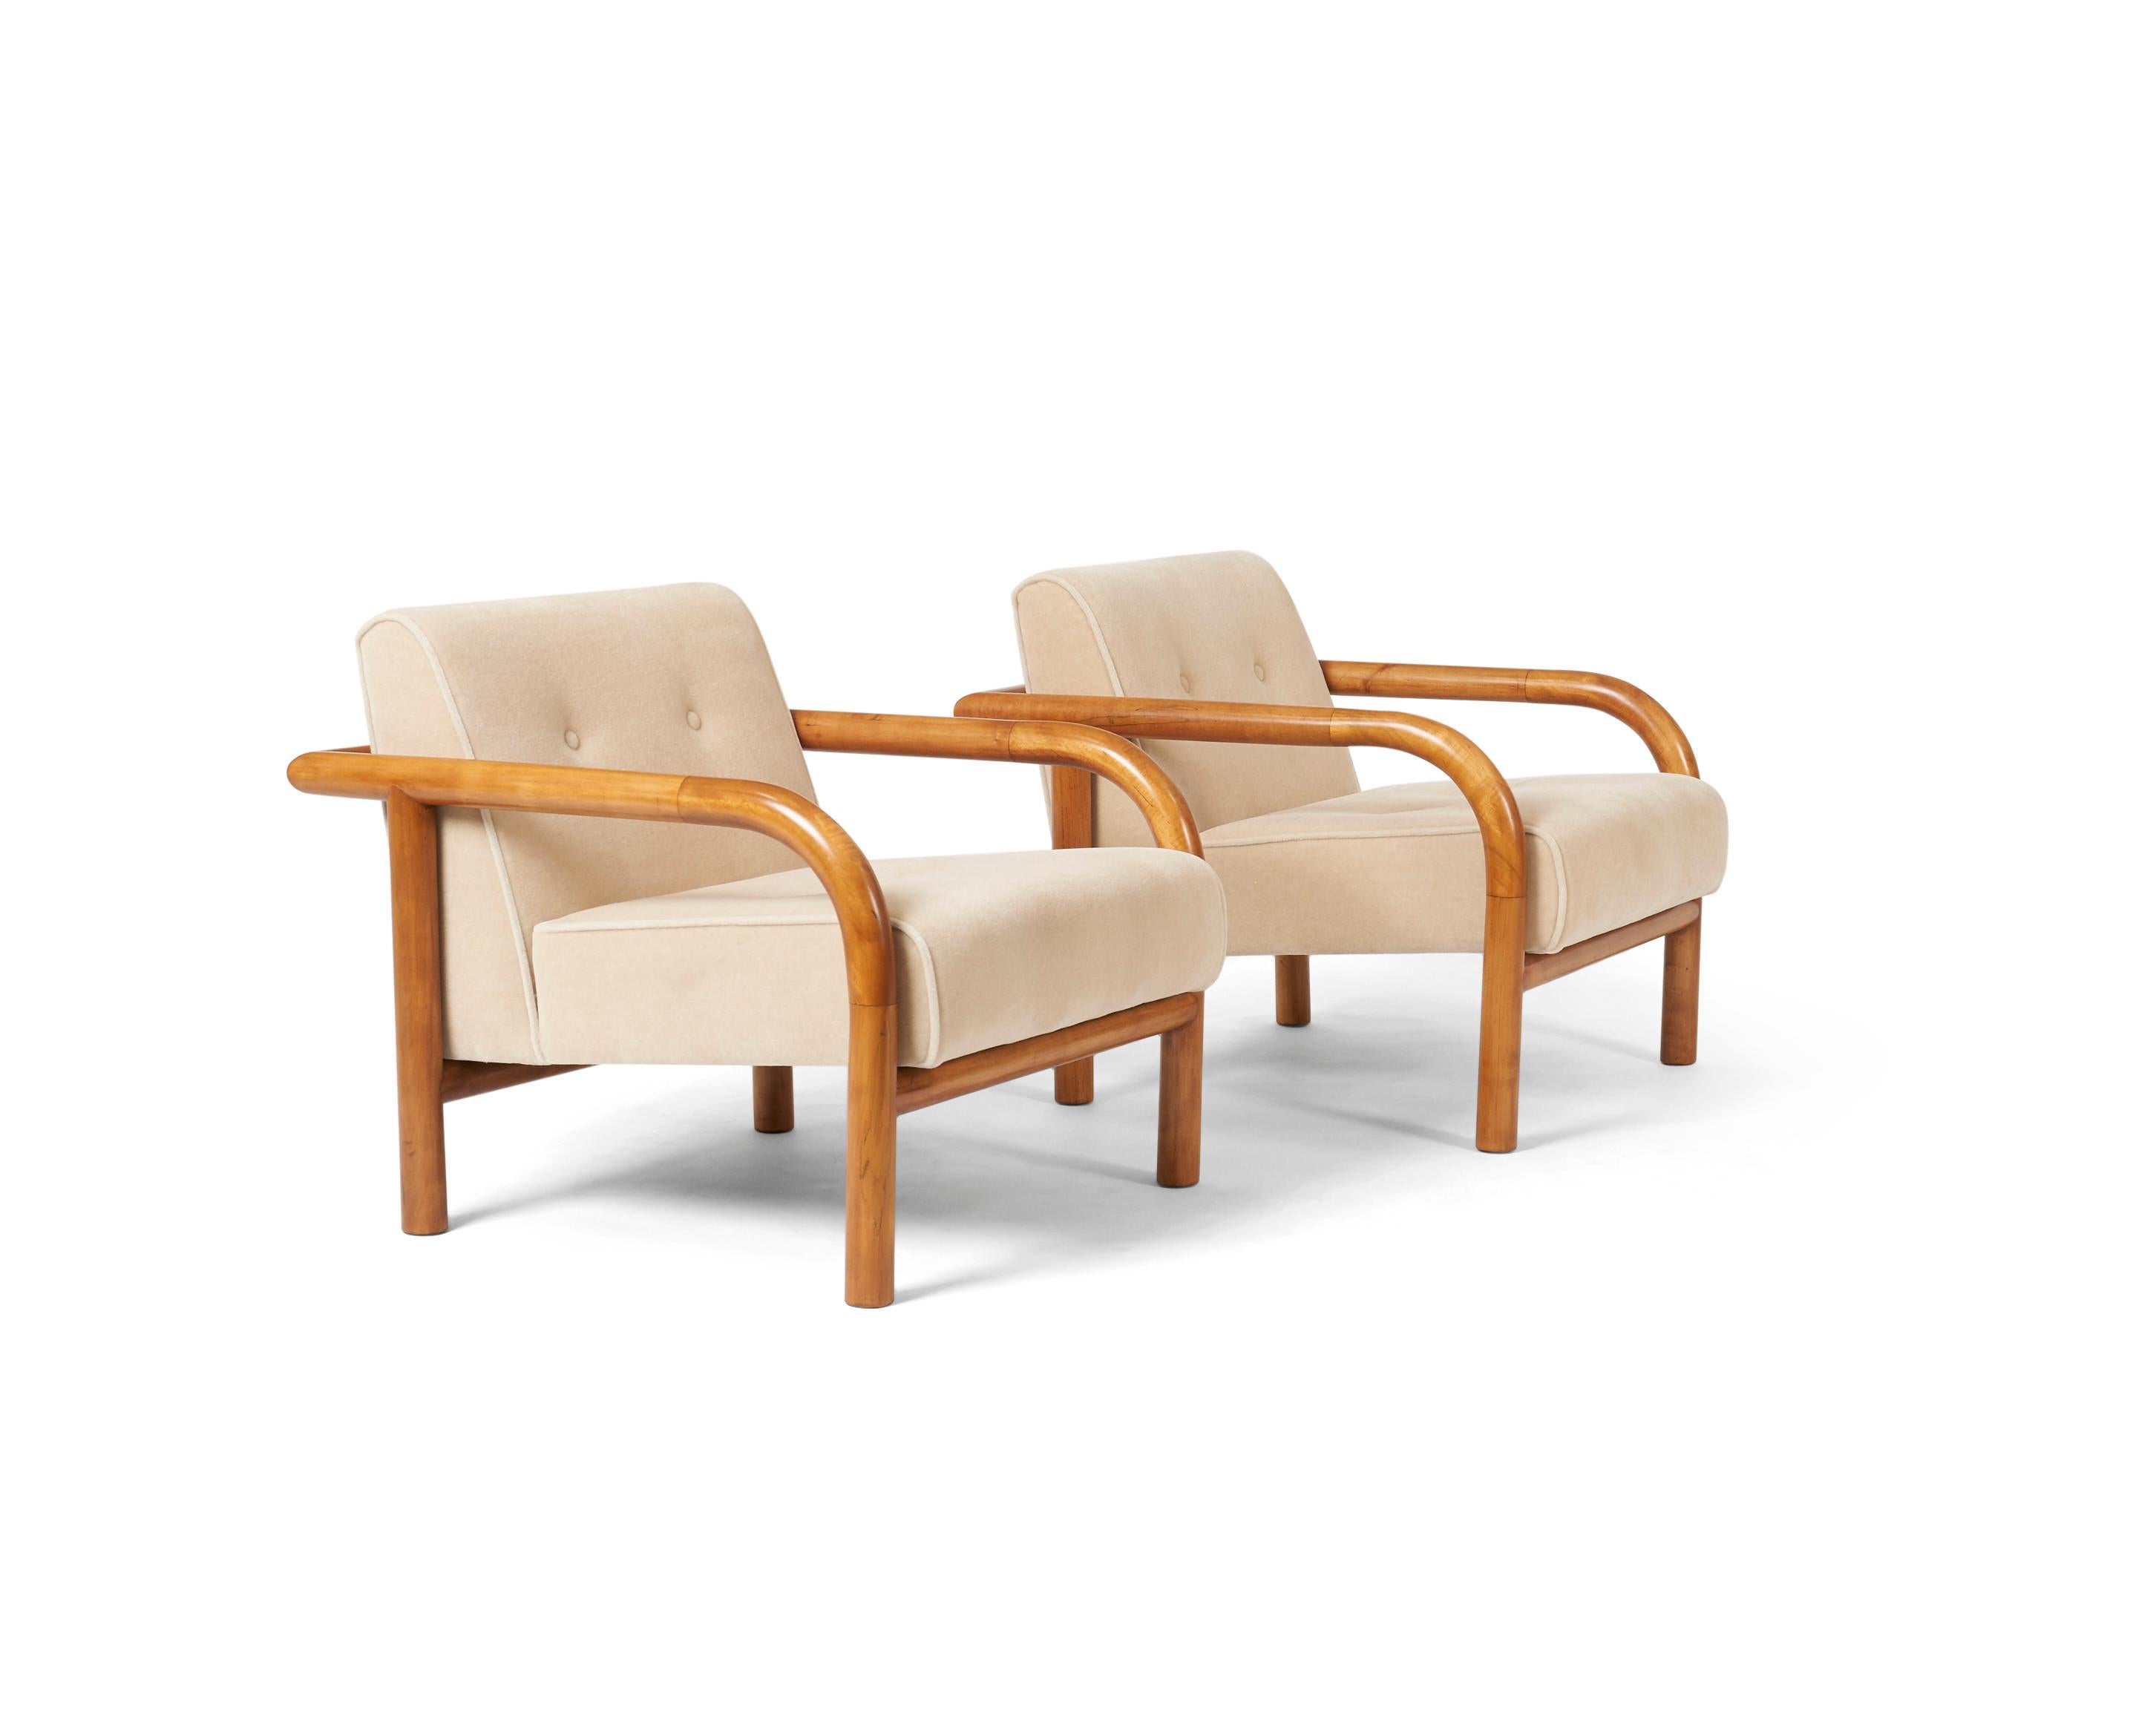 Pair of Postmodern lounge chairs designed by John Saladino for Dunbar in 1981. Fully restored. Refinished wood frames with new foam and mohair upholstery.